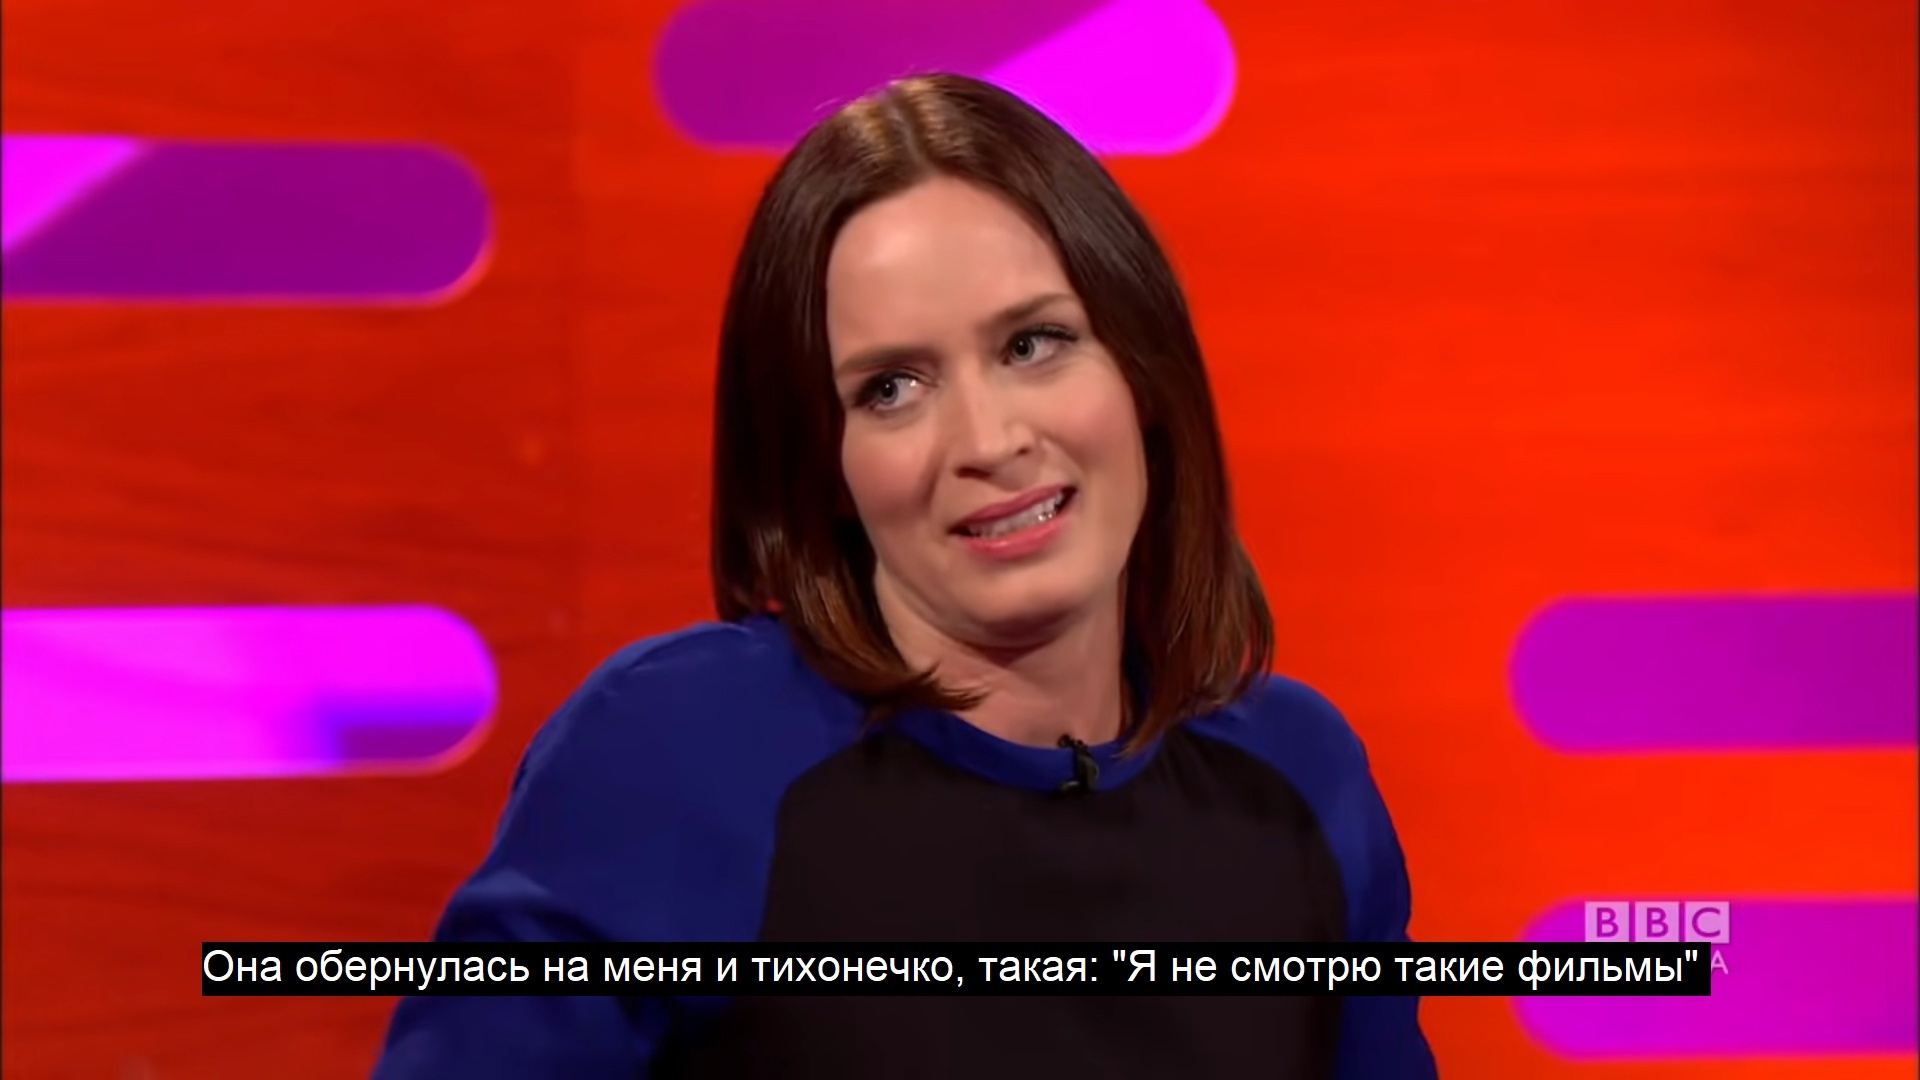 Awkward situation - Emily Blunt, Actors and actresses, Celebrities, Fans, Fans, Storyboard, The Graham Norton Show, Movies, From the network, The Devil Wears a Prada, Awkward moment, Awkwardness, Longpost, 